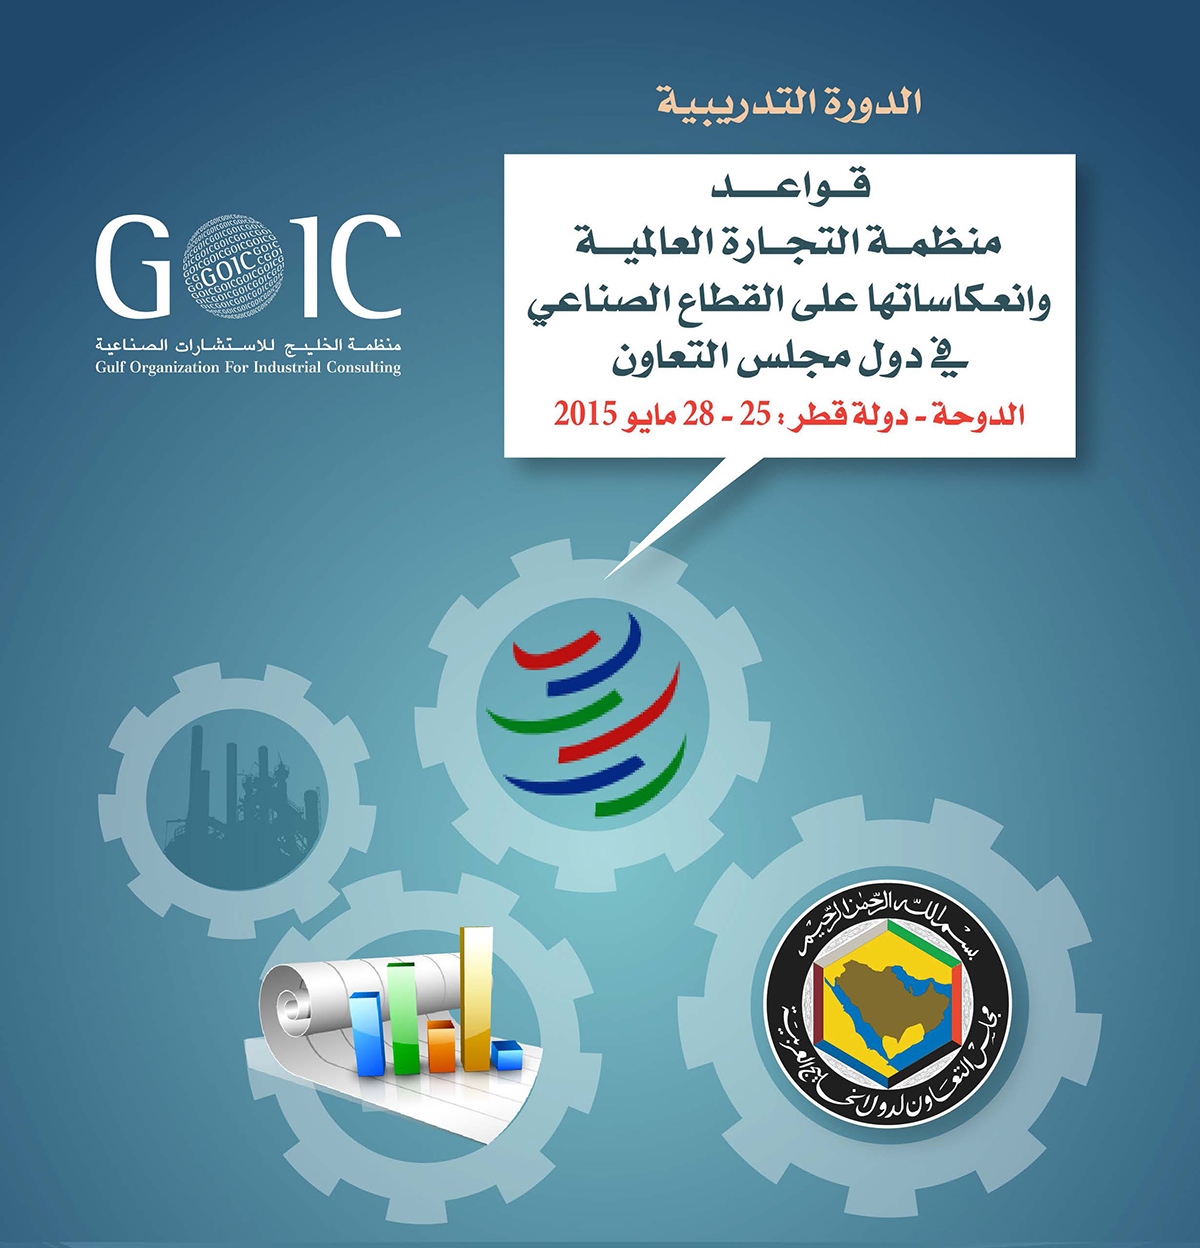 GOIC discusses the repercussions of WTO’s regulations on the Gulf industrial sector in a workshop